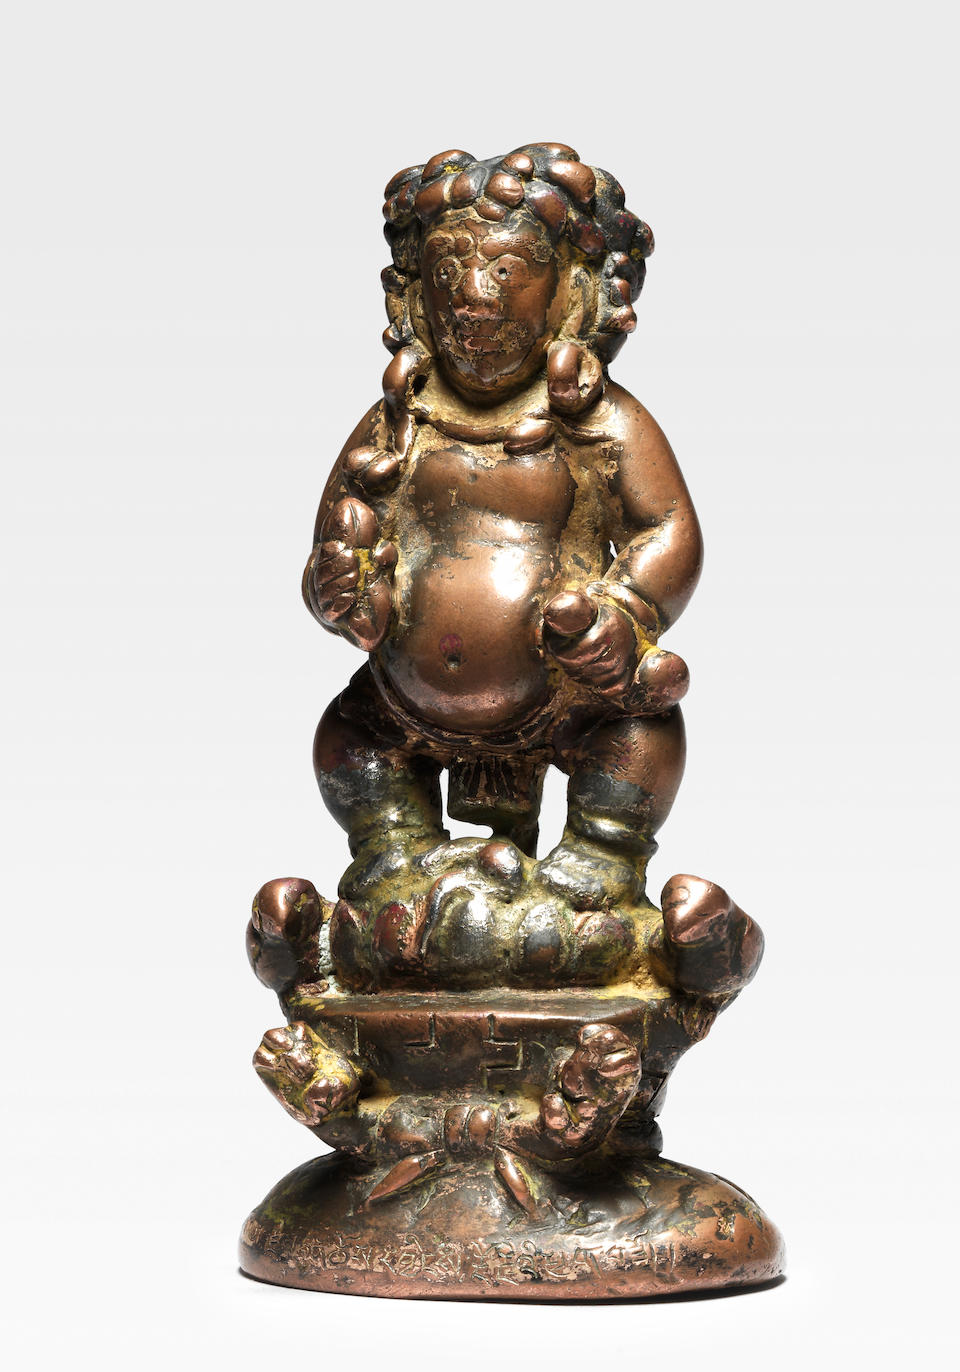 A COPPER COMPOSITE FIGURE OF VAJRAPANI AND KUBERA ATTRIBUTED BY INSCRIPTION TO THE TENTH KARMAPA, CHOYING DORJE (1604-1674)&#8232;